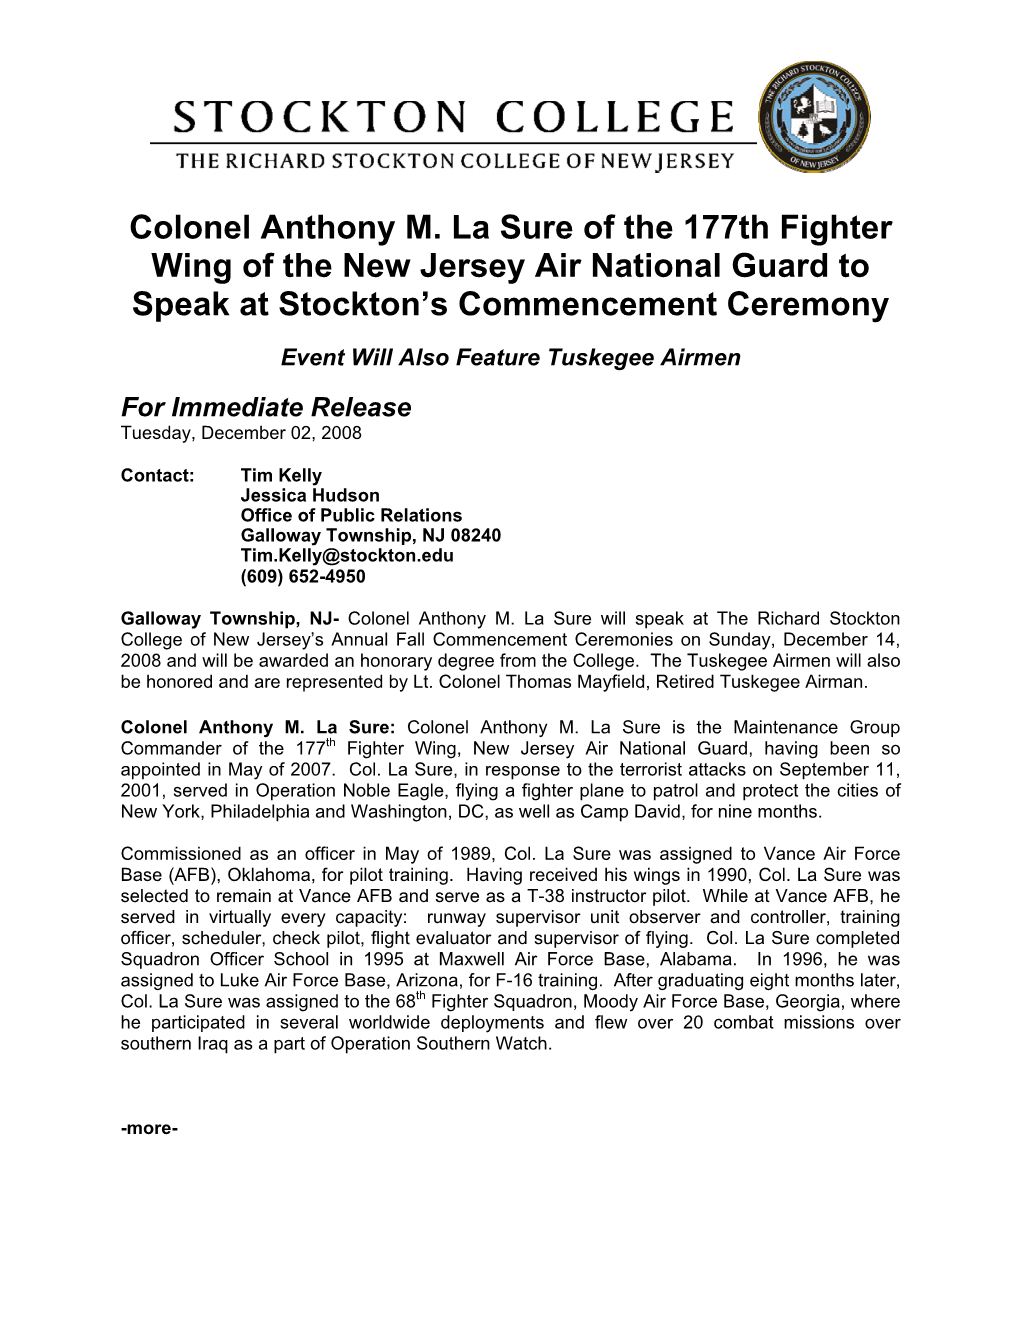 Colonel Anthony M. La Sure of the 177Th Fighter Wing of the New Jersey Air National Guard to Speak at Stockton’S Commencement Ceremony